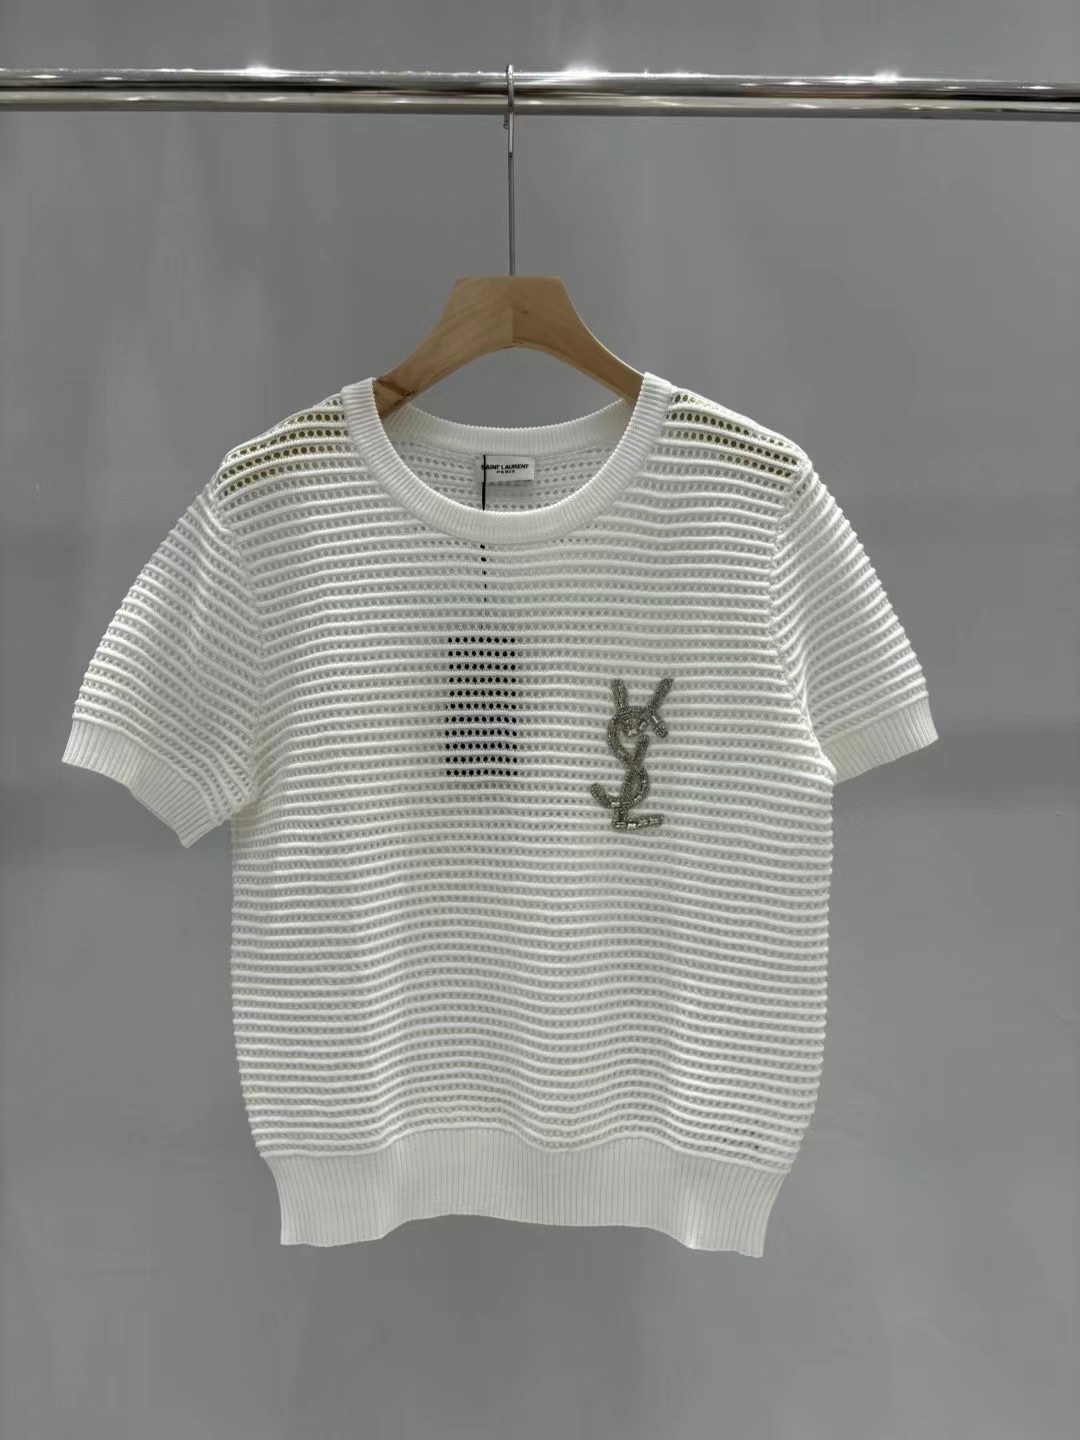 Yves Saint Laurent Clothing Shirts & Blouses Openwork Knitting Summer Collection